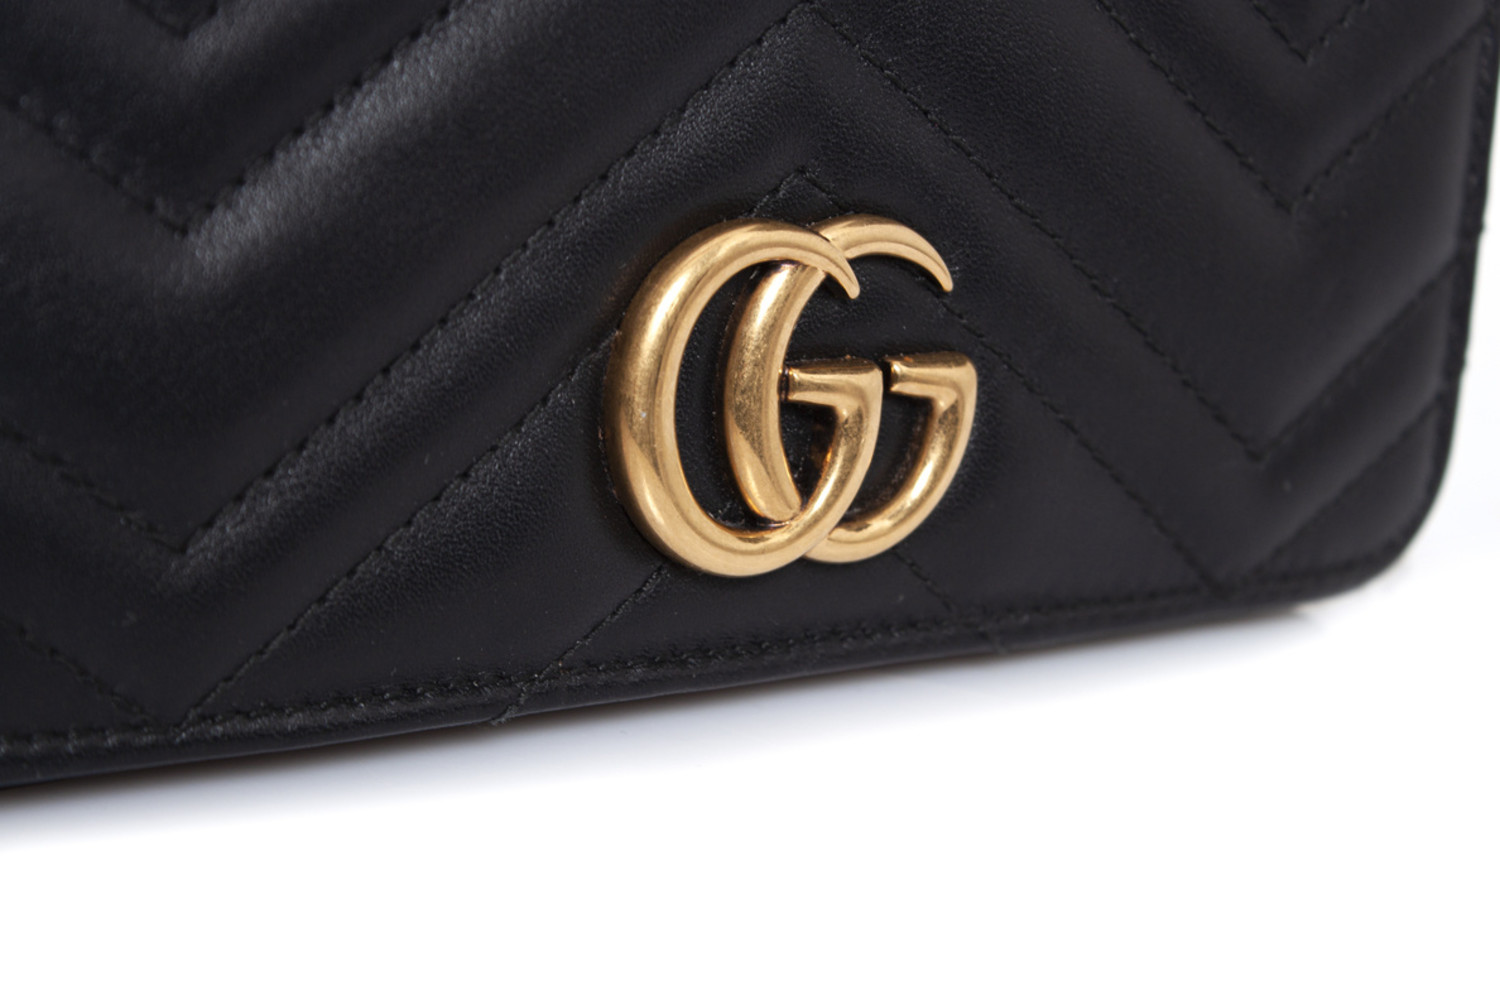 Gucci gg marmont large quilted leather shoulder bag. #gucci #bags